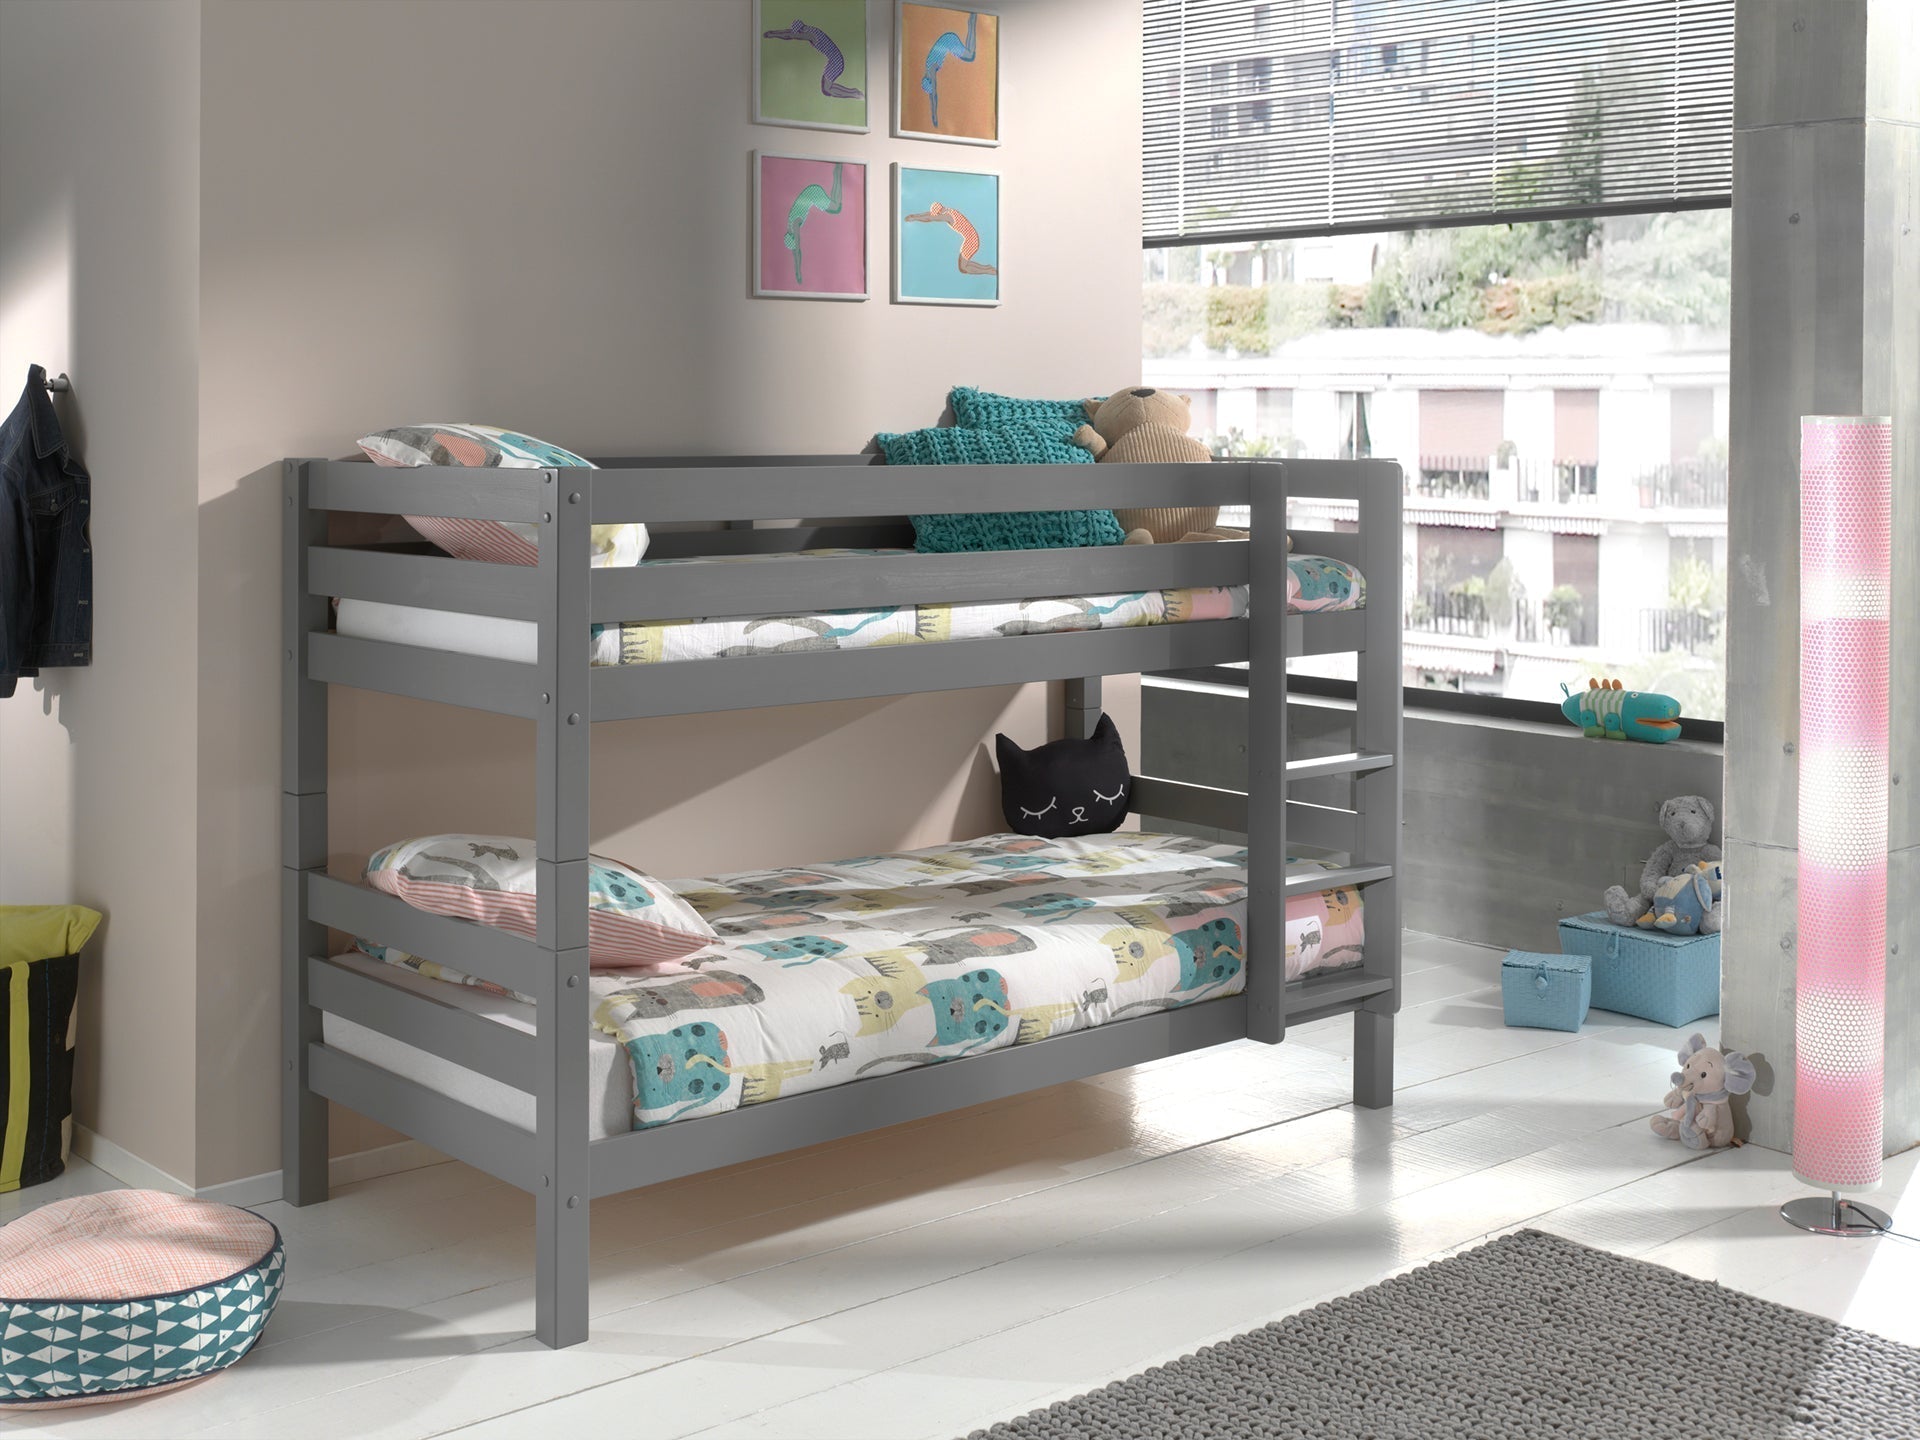 Vipack Pino Kids Bunk Bed 140cm Height - Grey